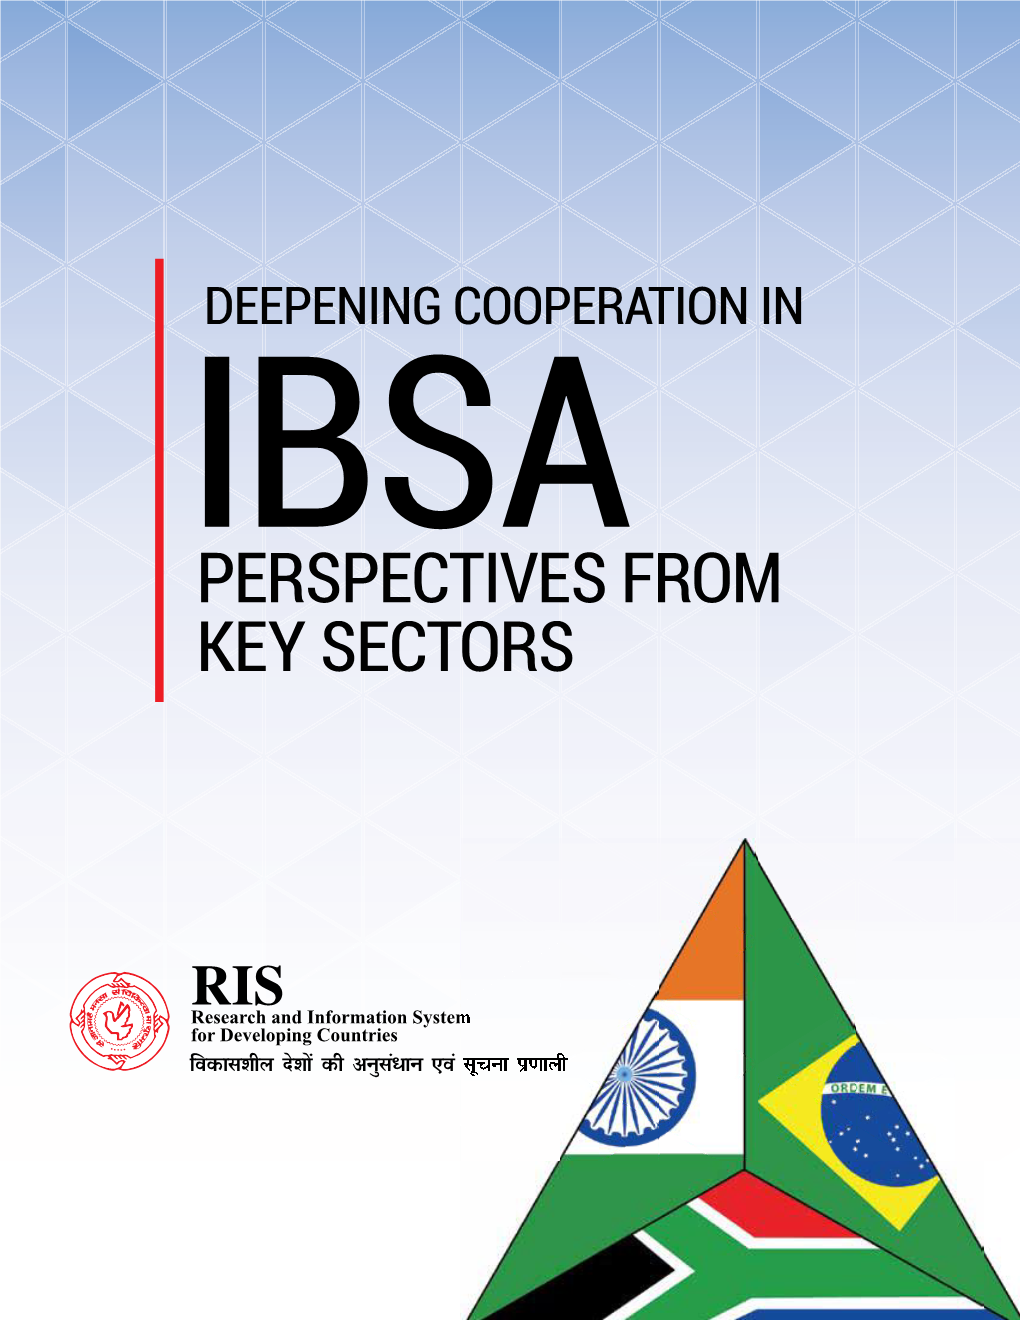 Deepening Cooperation in IBSA: Perspectives from Key Sectors Copyright © RIS, 2020